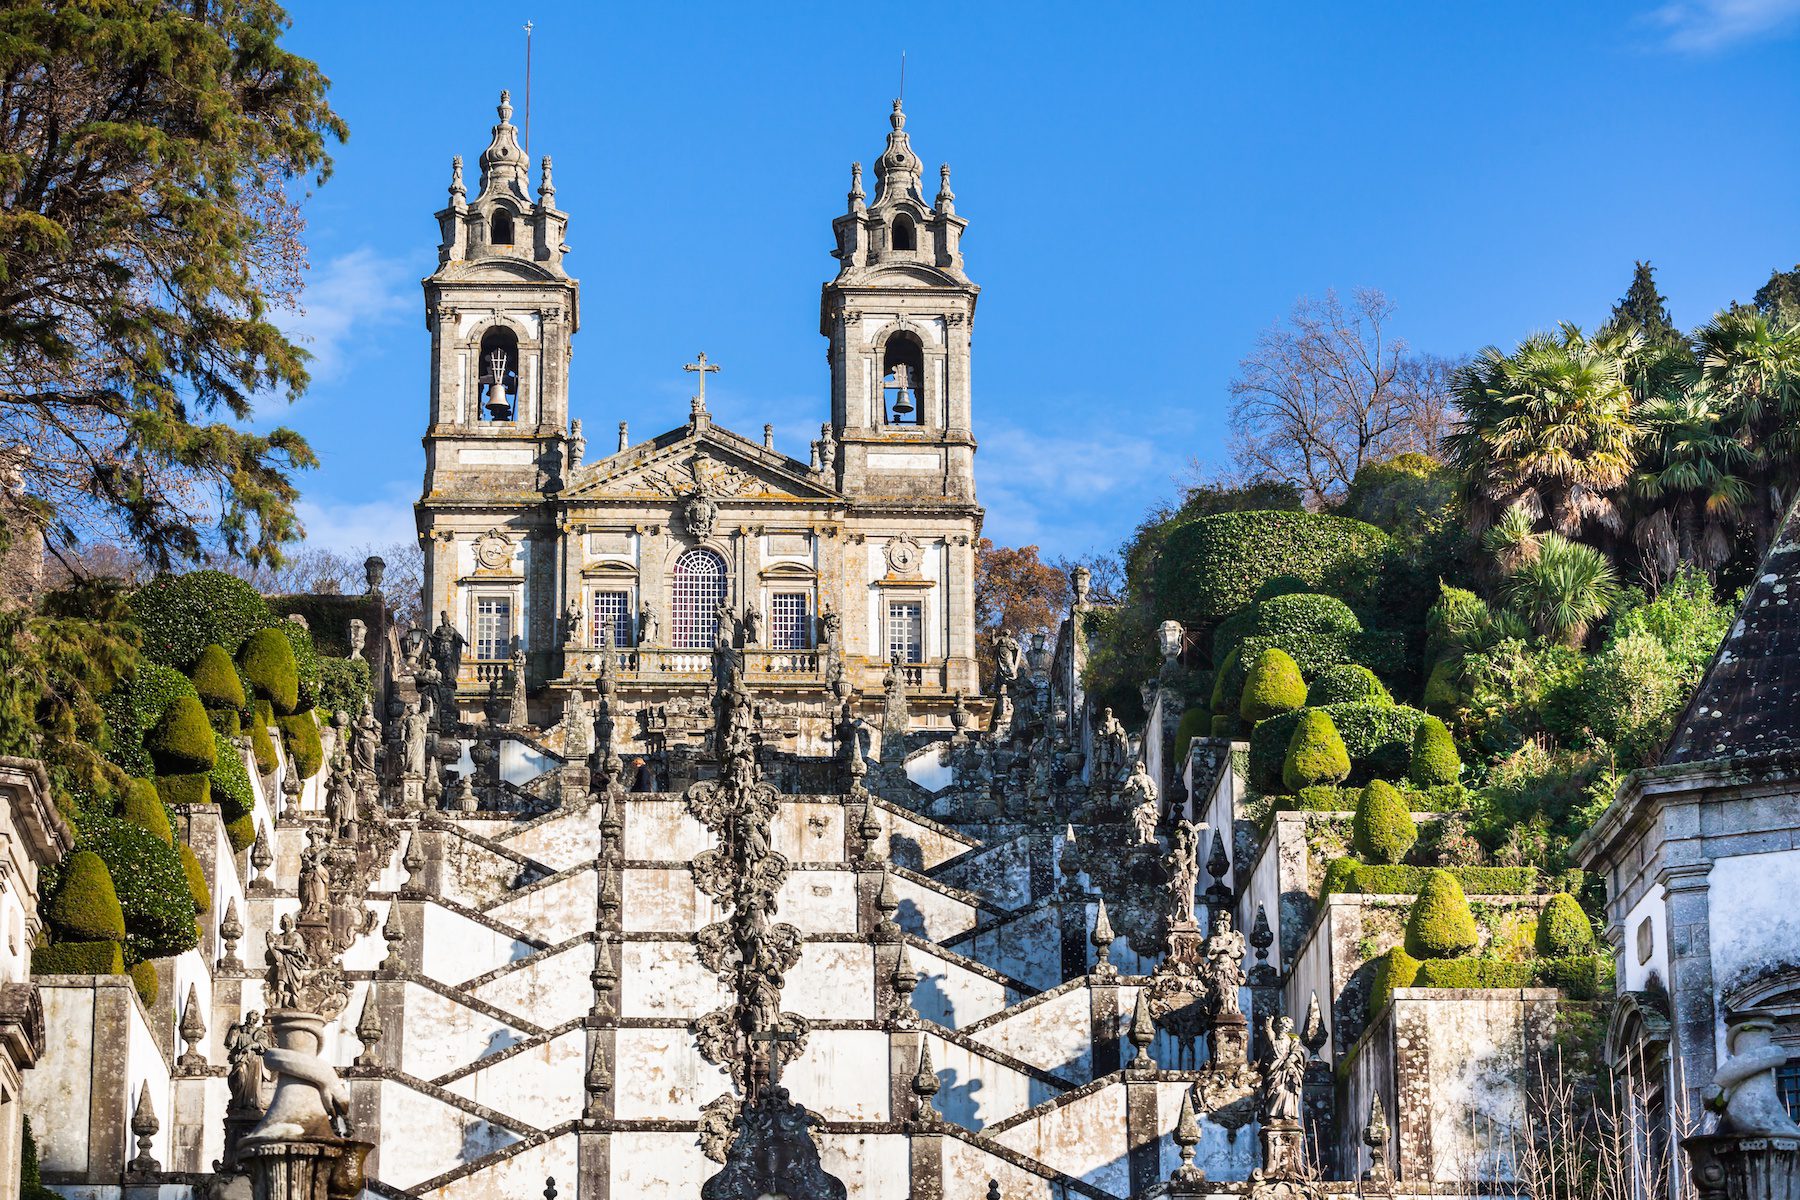 A castle style historic building with countless statues and stairways make up Braga in Portugal